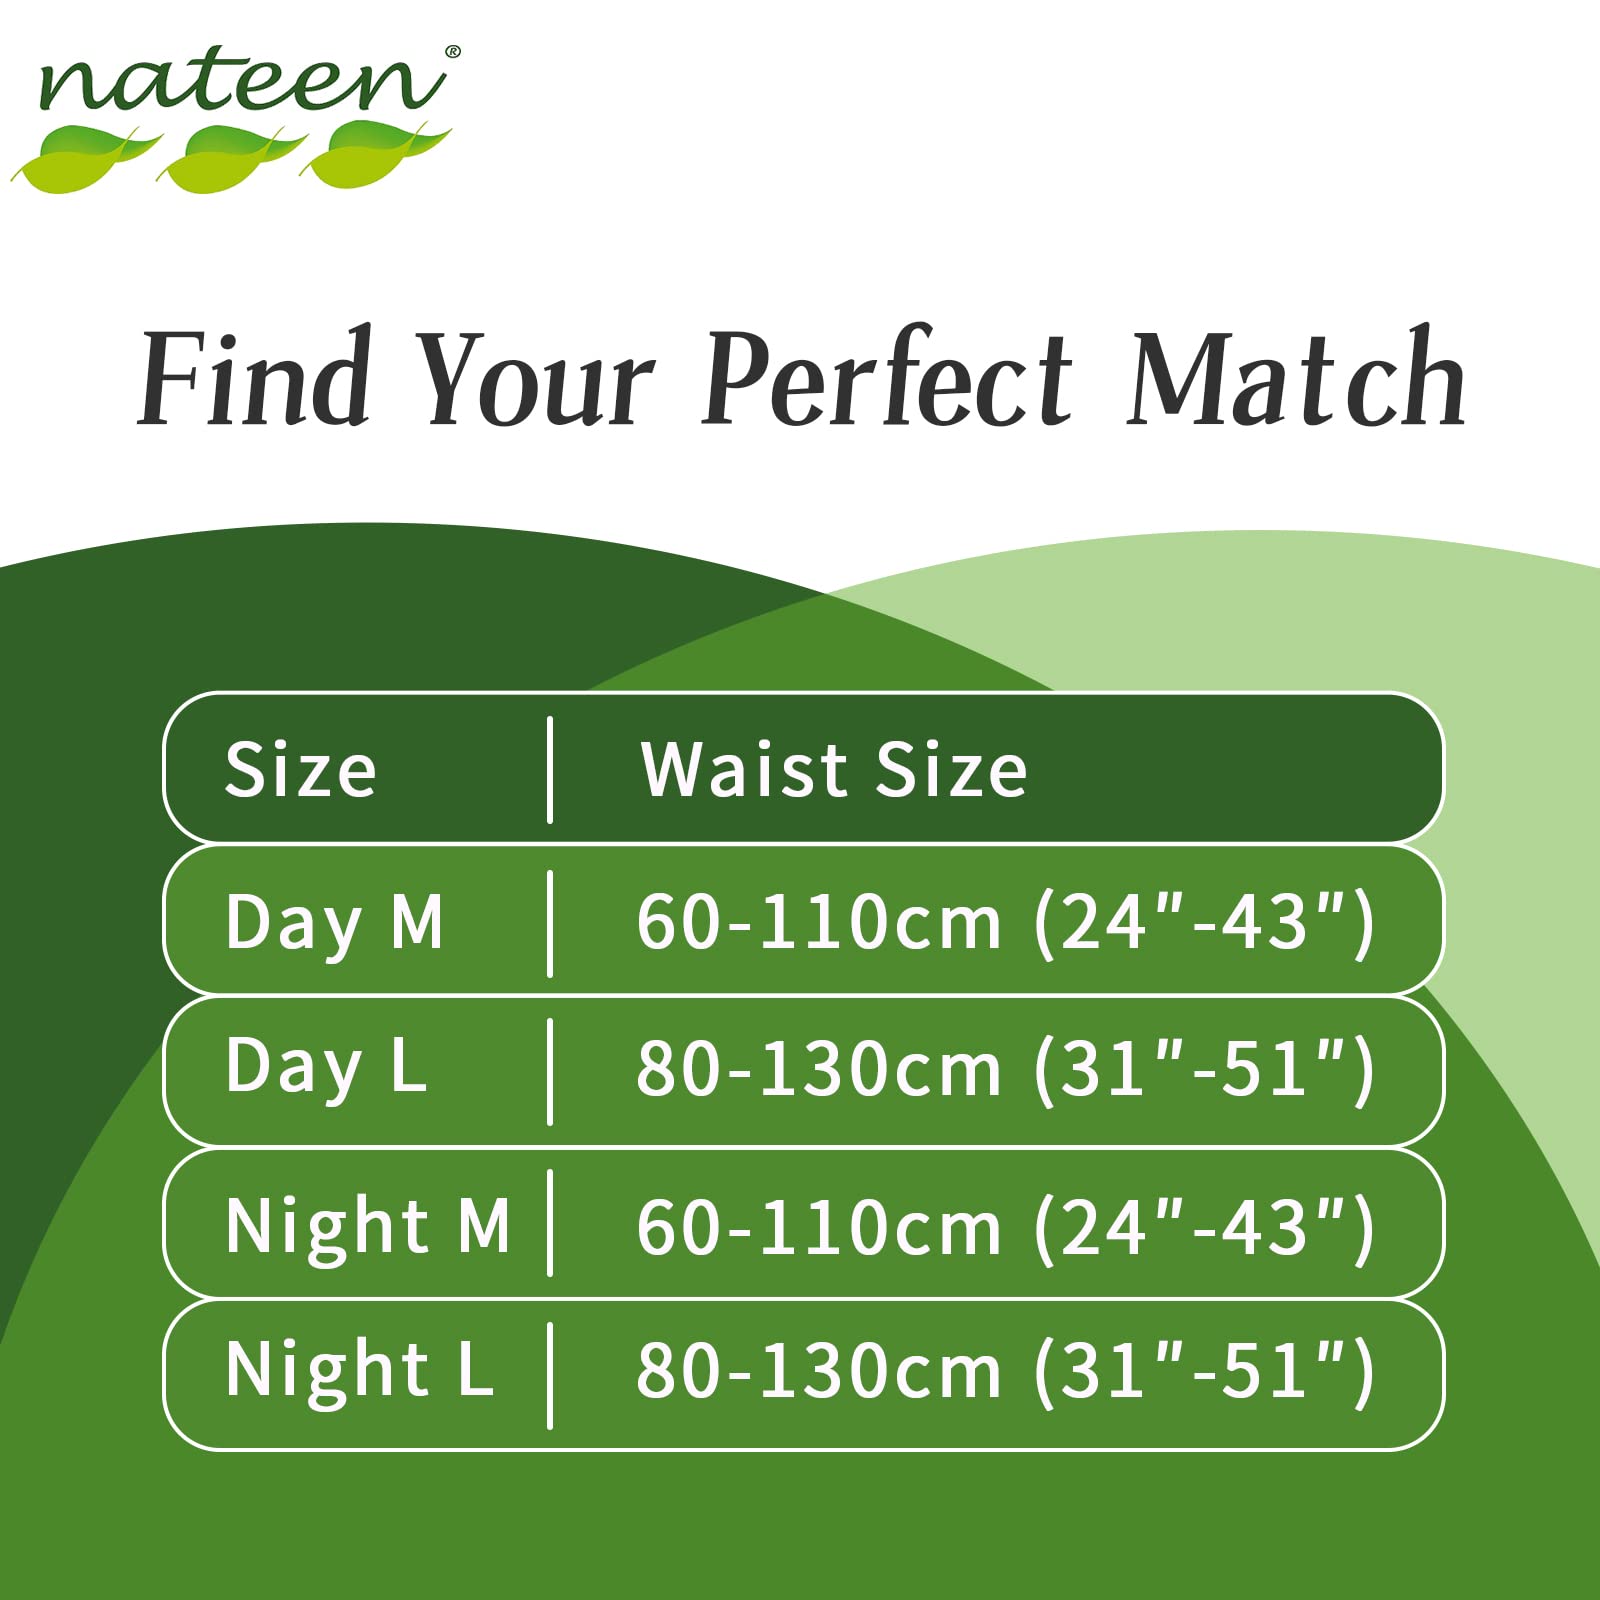 Nateen Hospeen Adult Diapers Pants,Period Panties for Sanitary Protection,Large,Waist Size 80-130cm,10 Count Day Unisex Adult Pull Ups,360 Dgree Elastic Waistband,Super Soft Fit